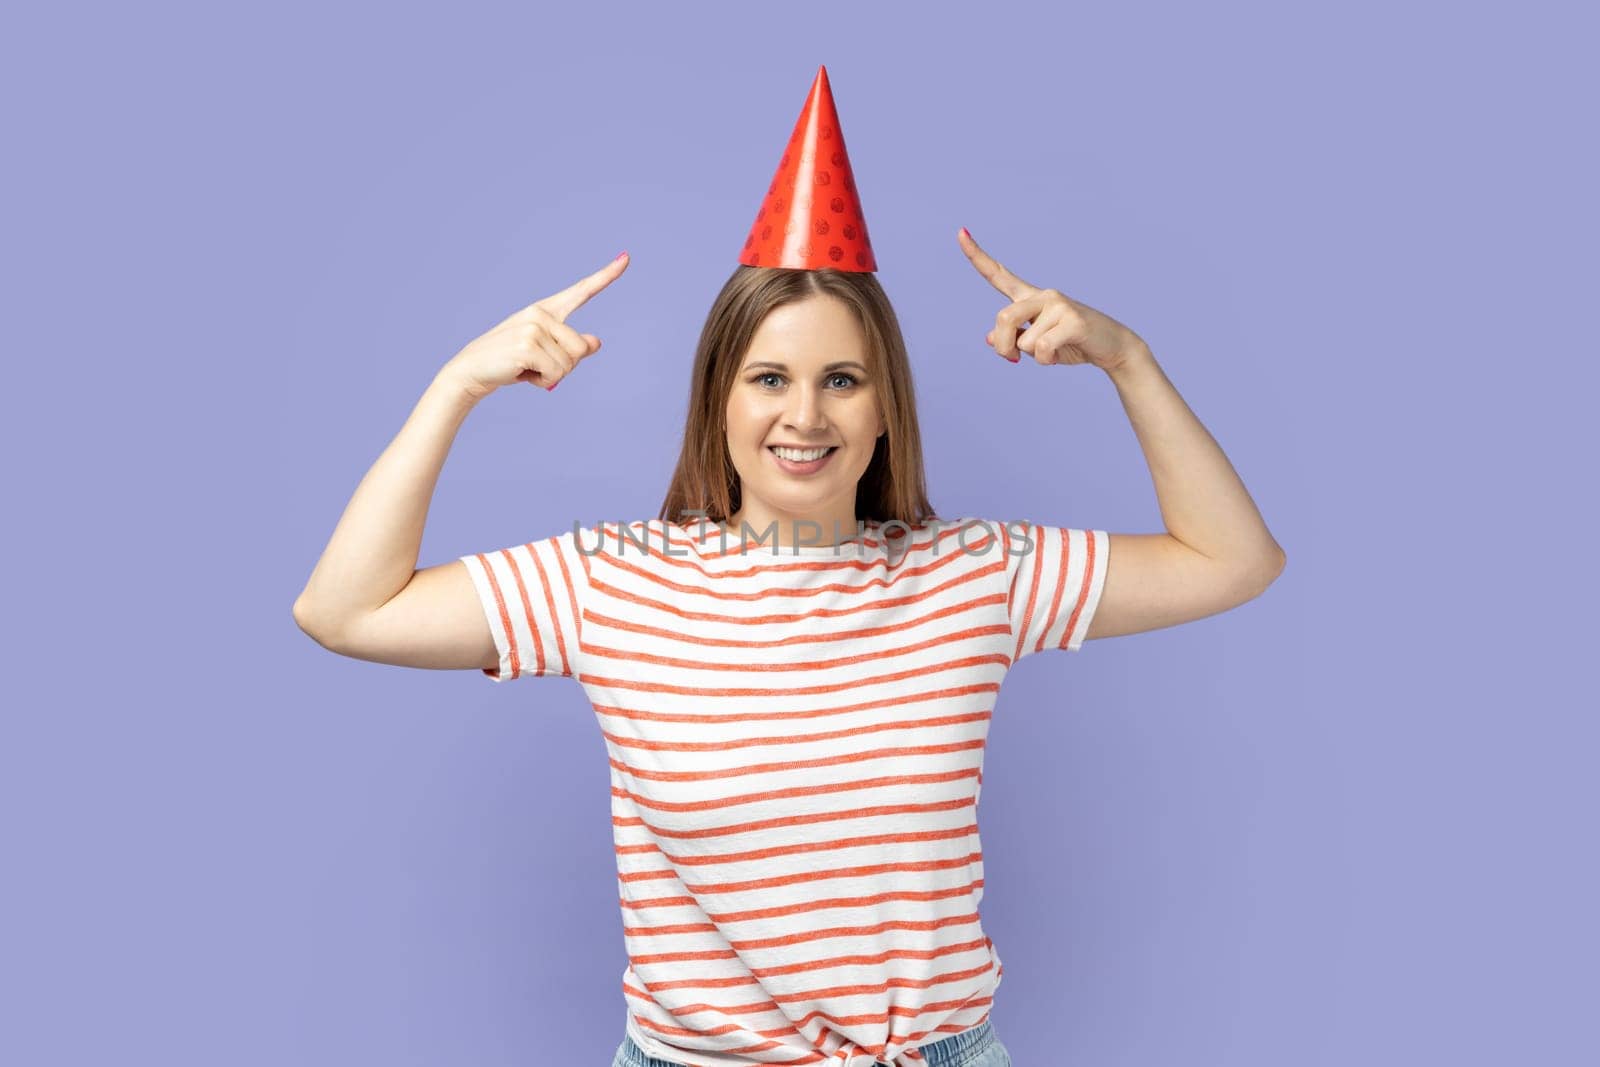 Portrait of blond woman wearing striped T-shirt pointing to funny party cone on head and smiling to camera, celebrating career growth. Indoor studio shot isolated on purple background.